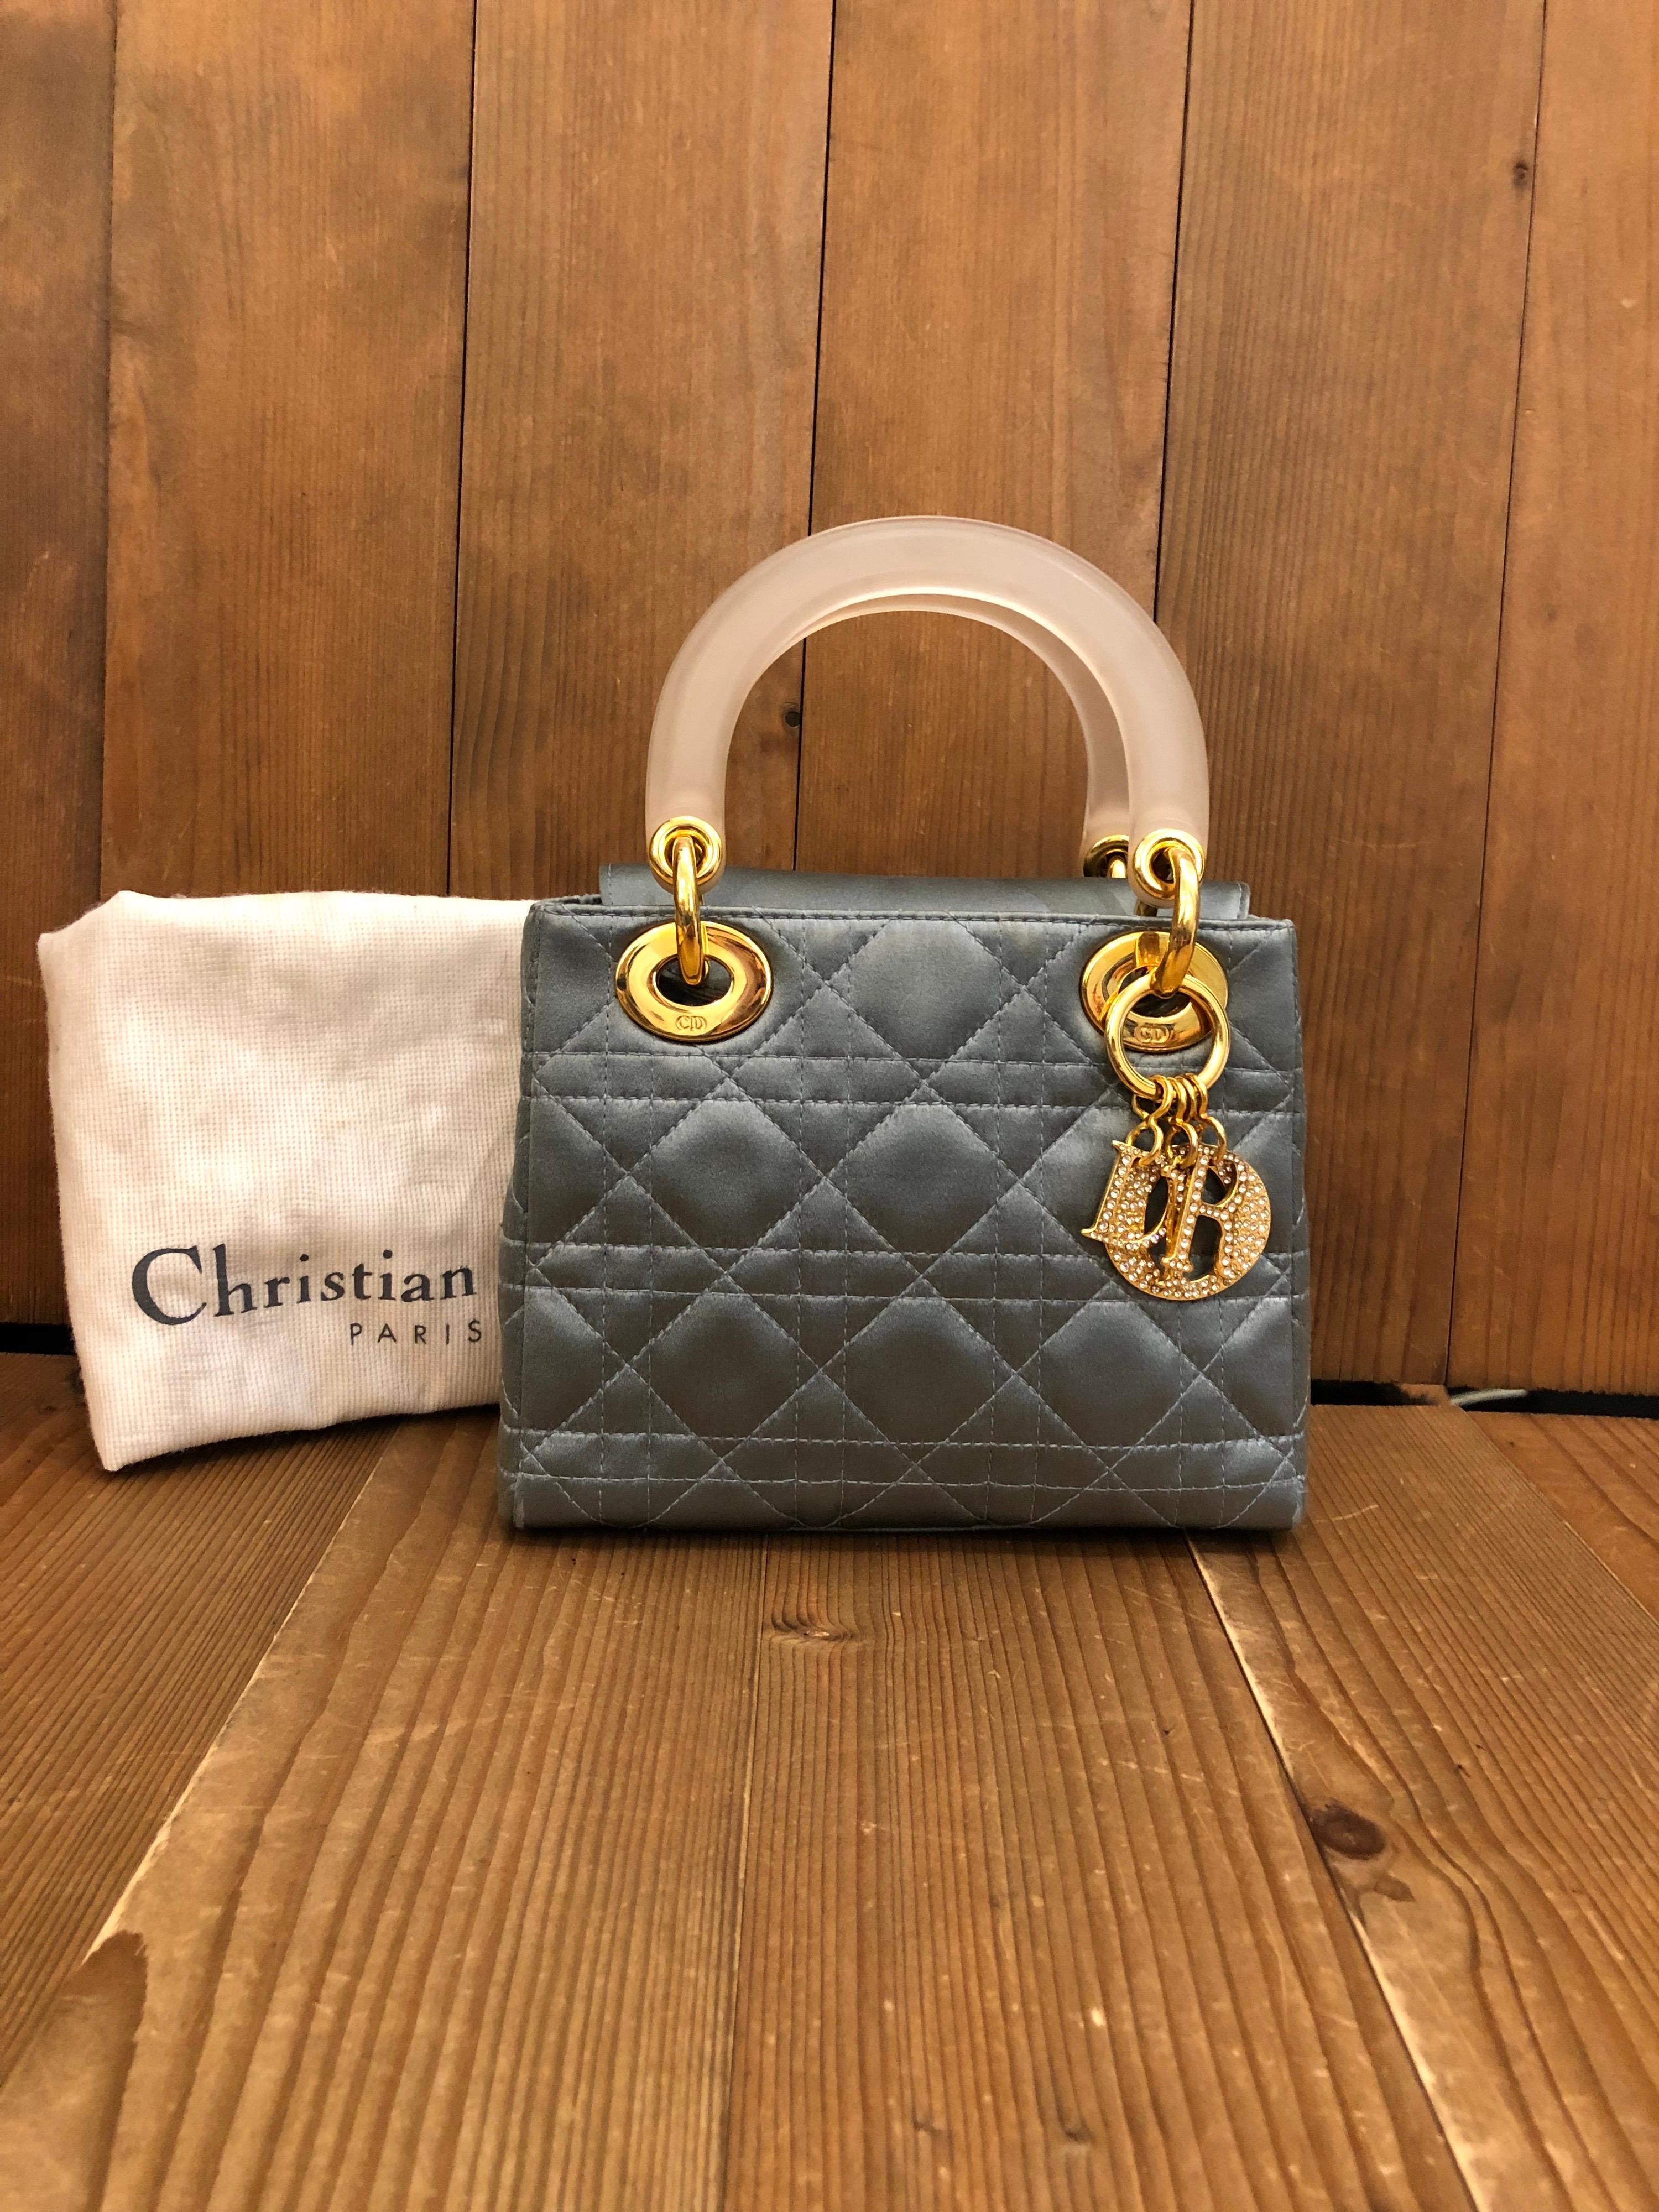 The most iconic Christian Dior handbag, the Lady Dior, in honor of Diana, Princess of Wales. It was the handbag Dior wished to give the Princess of Wales to carry on the occasion of her visit to Paris.

This Mini Lady Dior is decorated with light